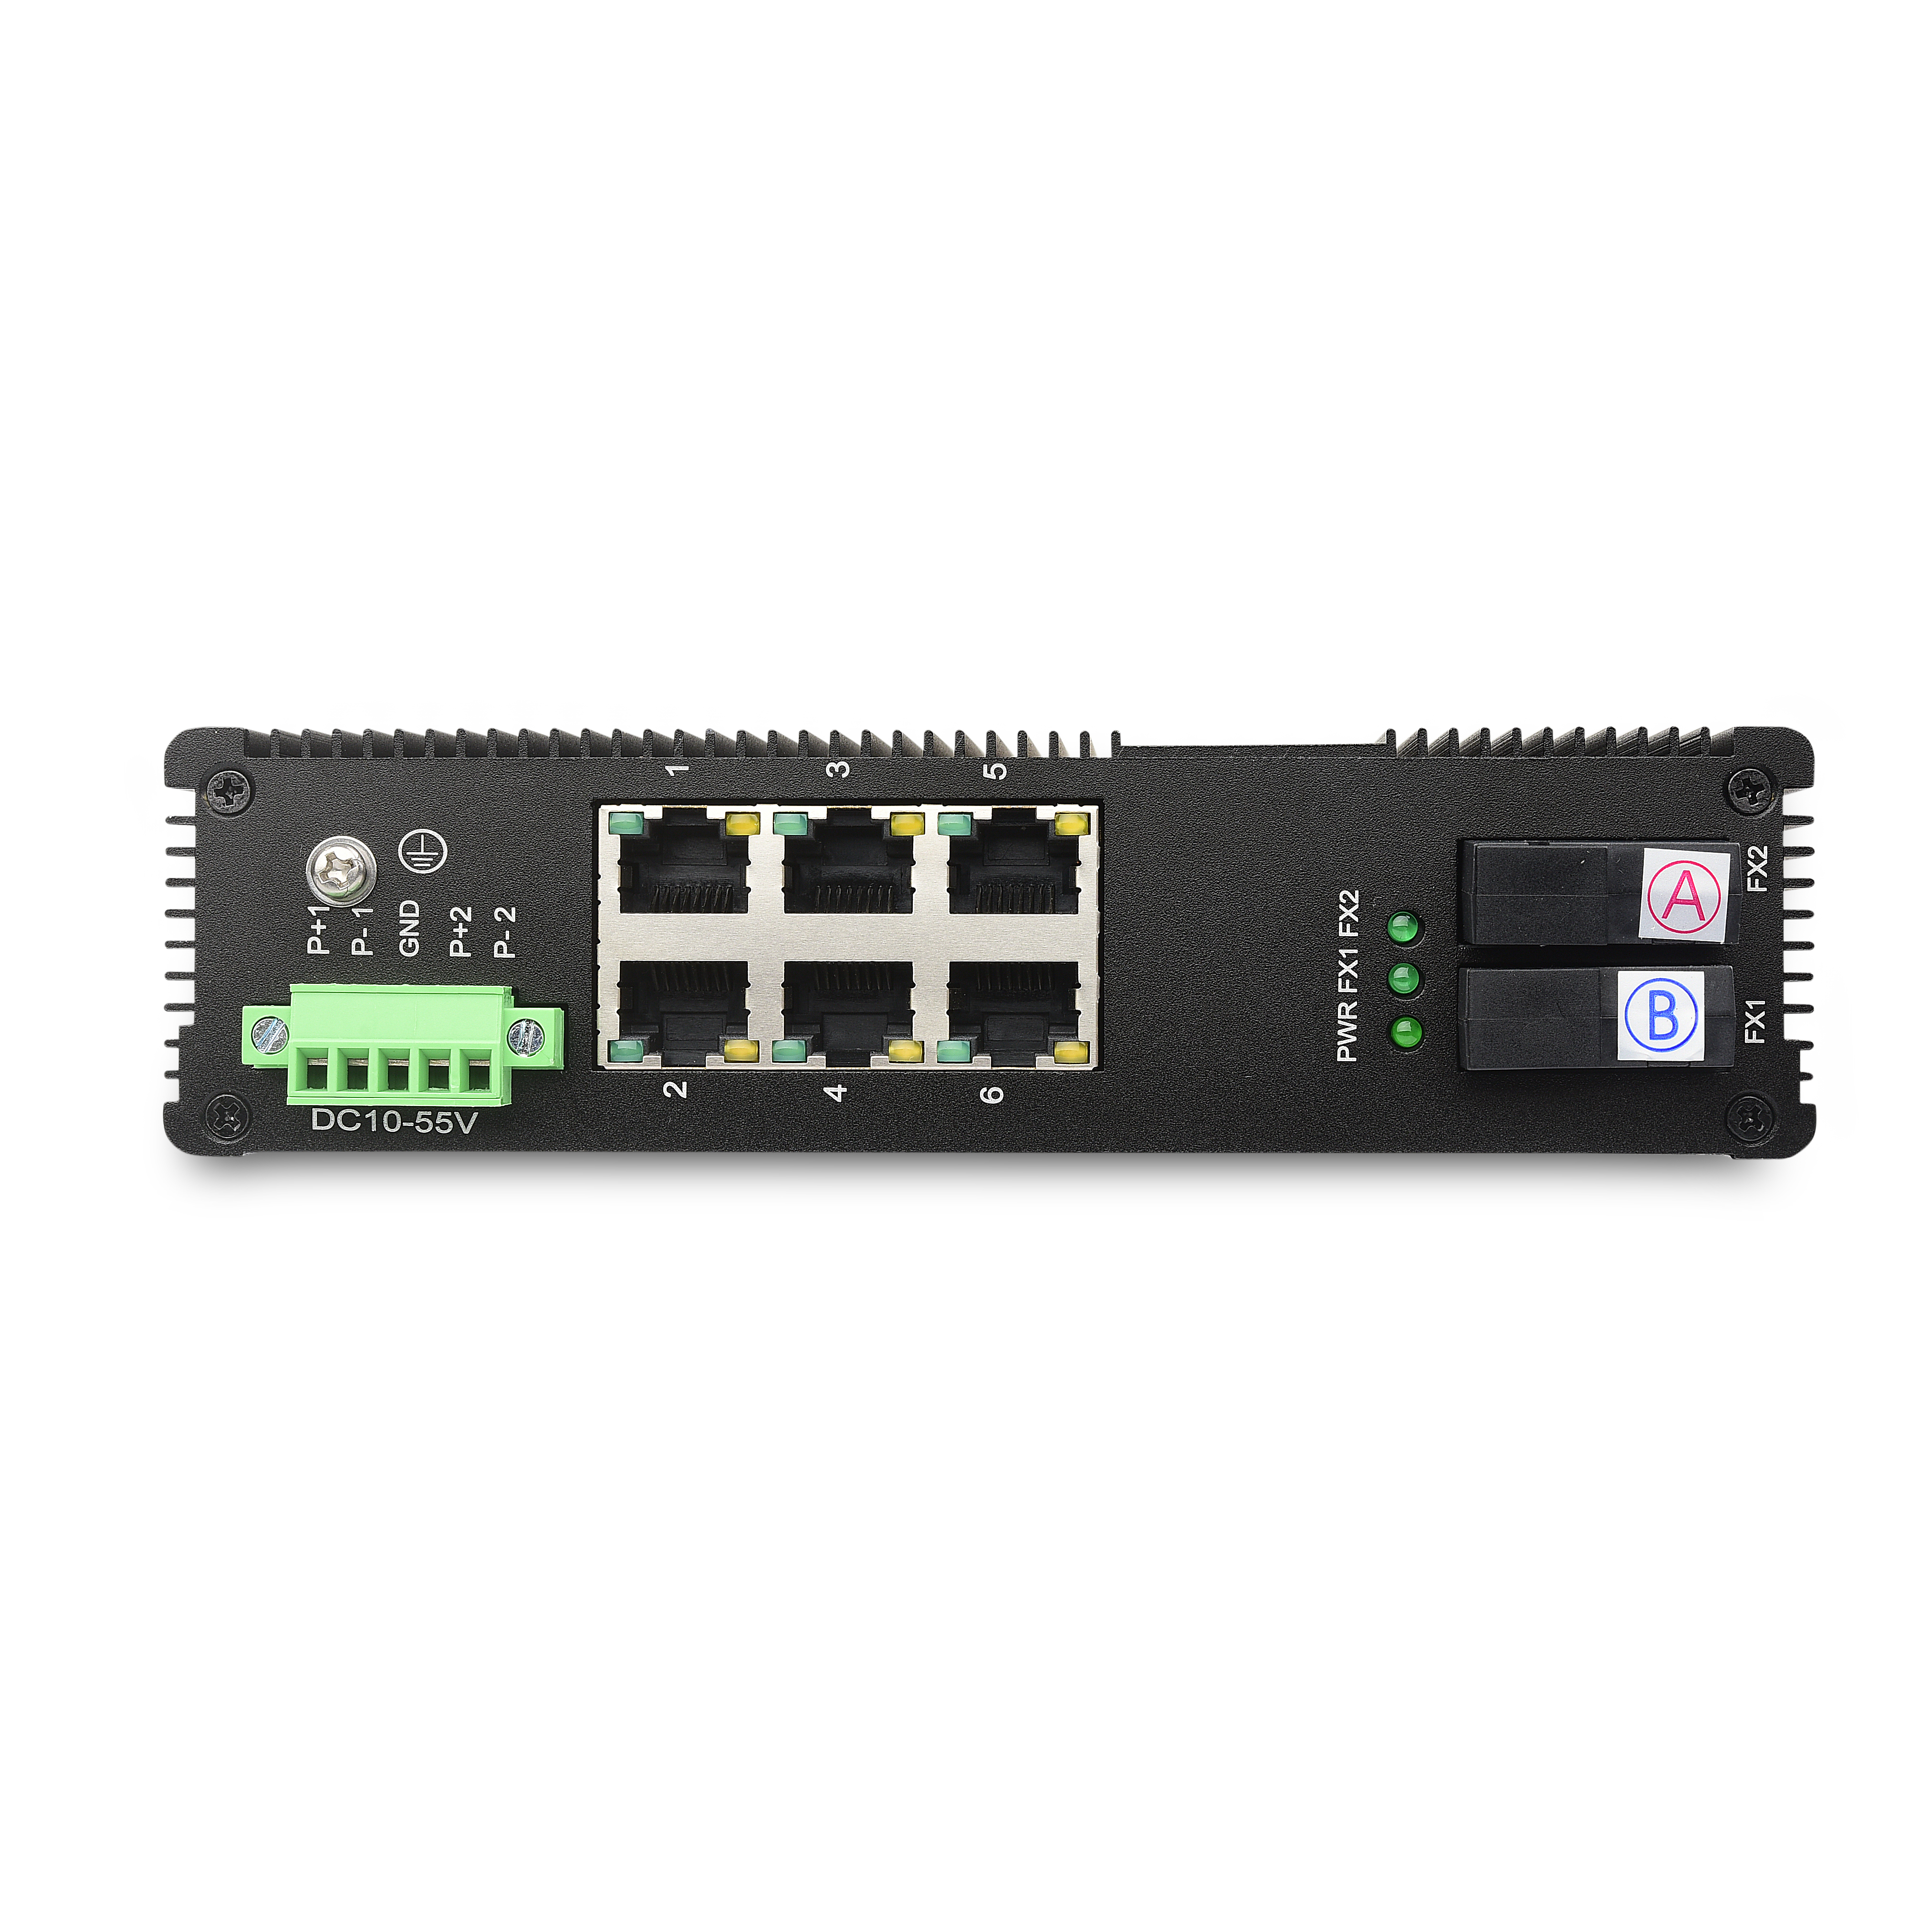 6 10/100TX and 2 100FX | Unmanaged Industrial Ethernet Switch JHA-IF26H Featured Image